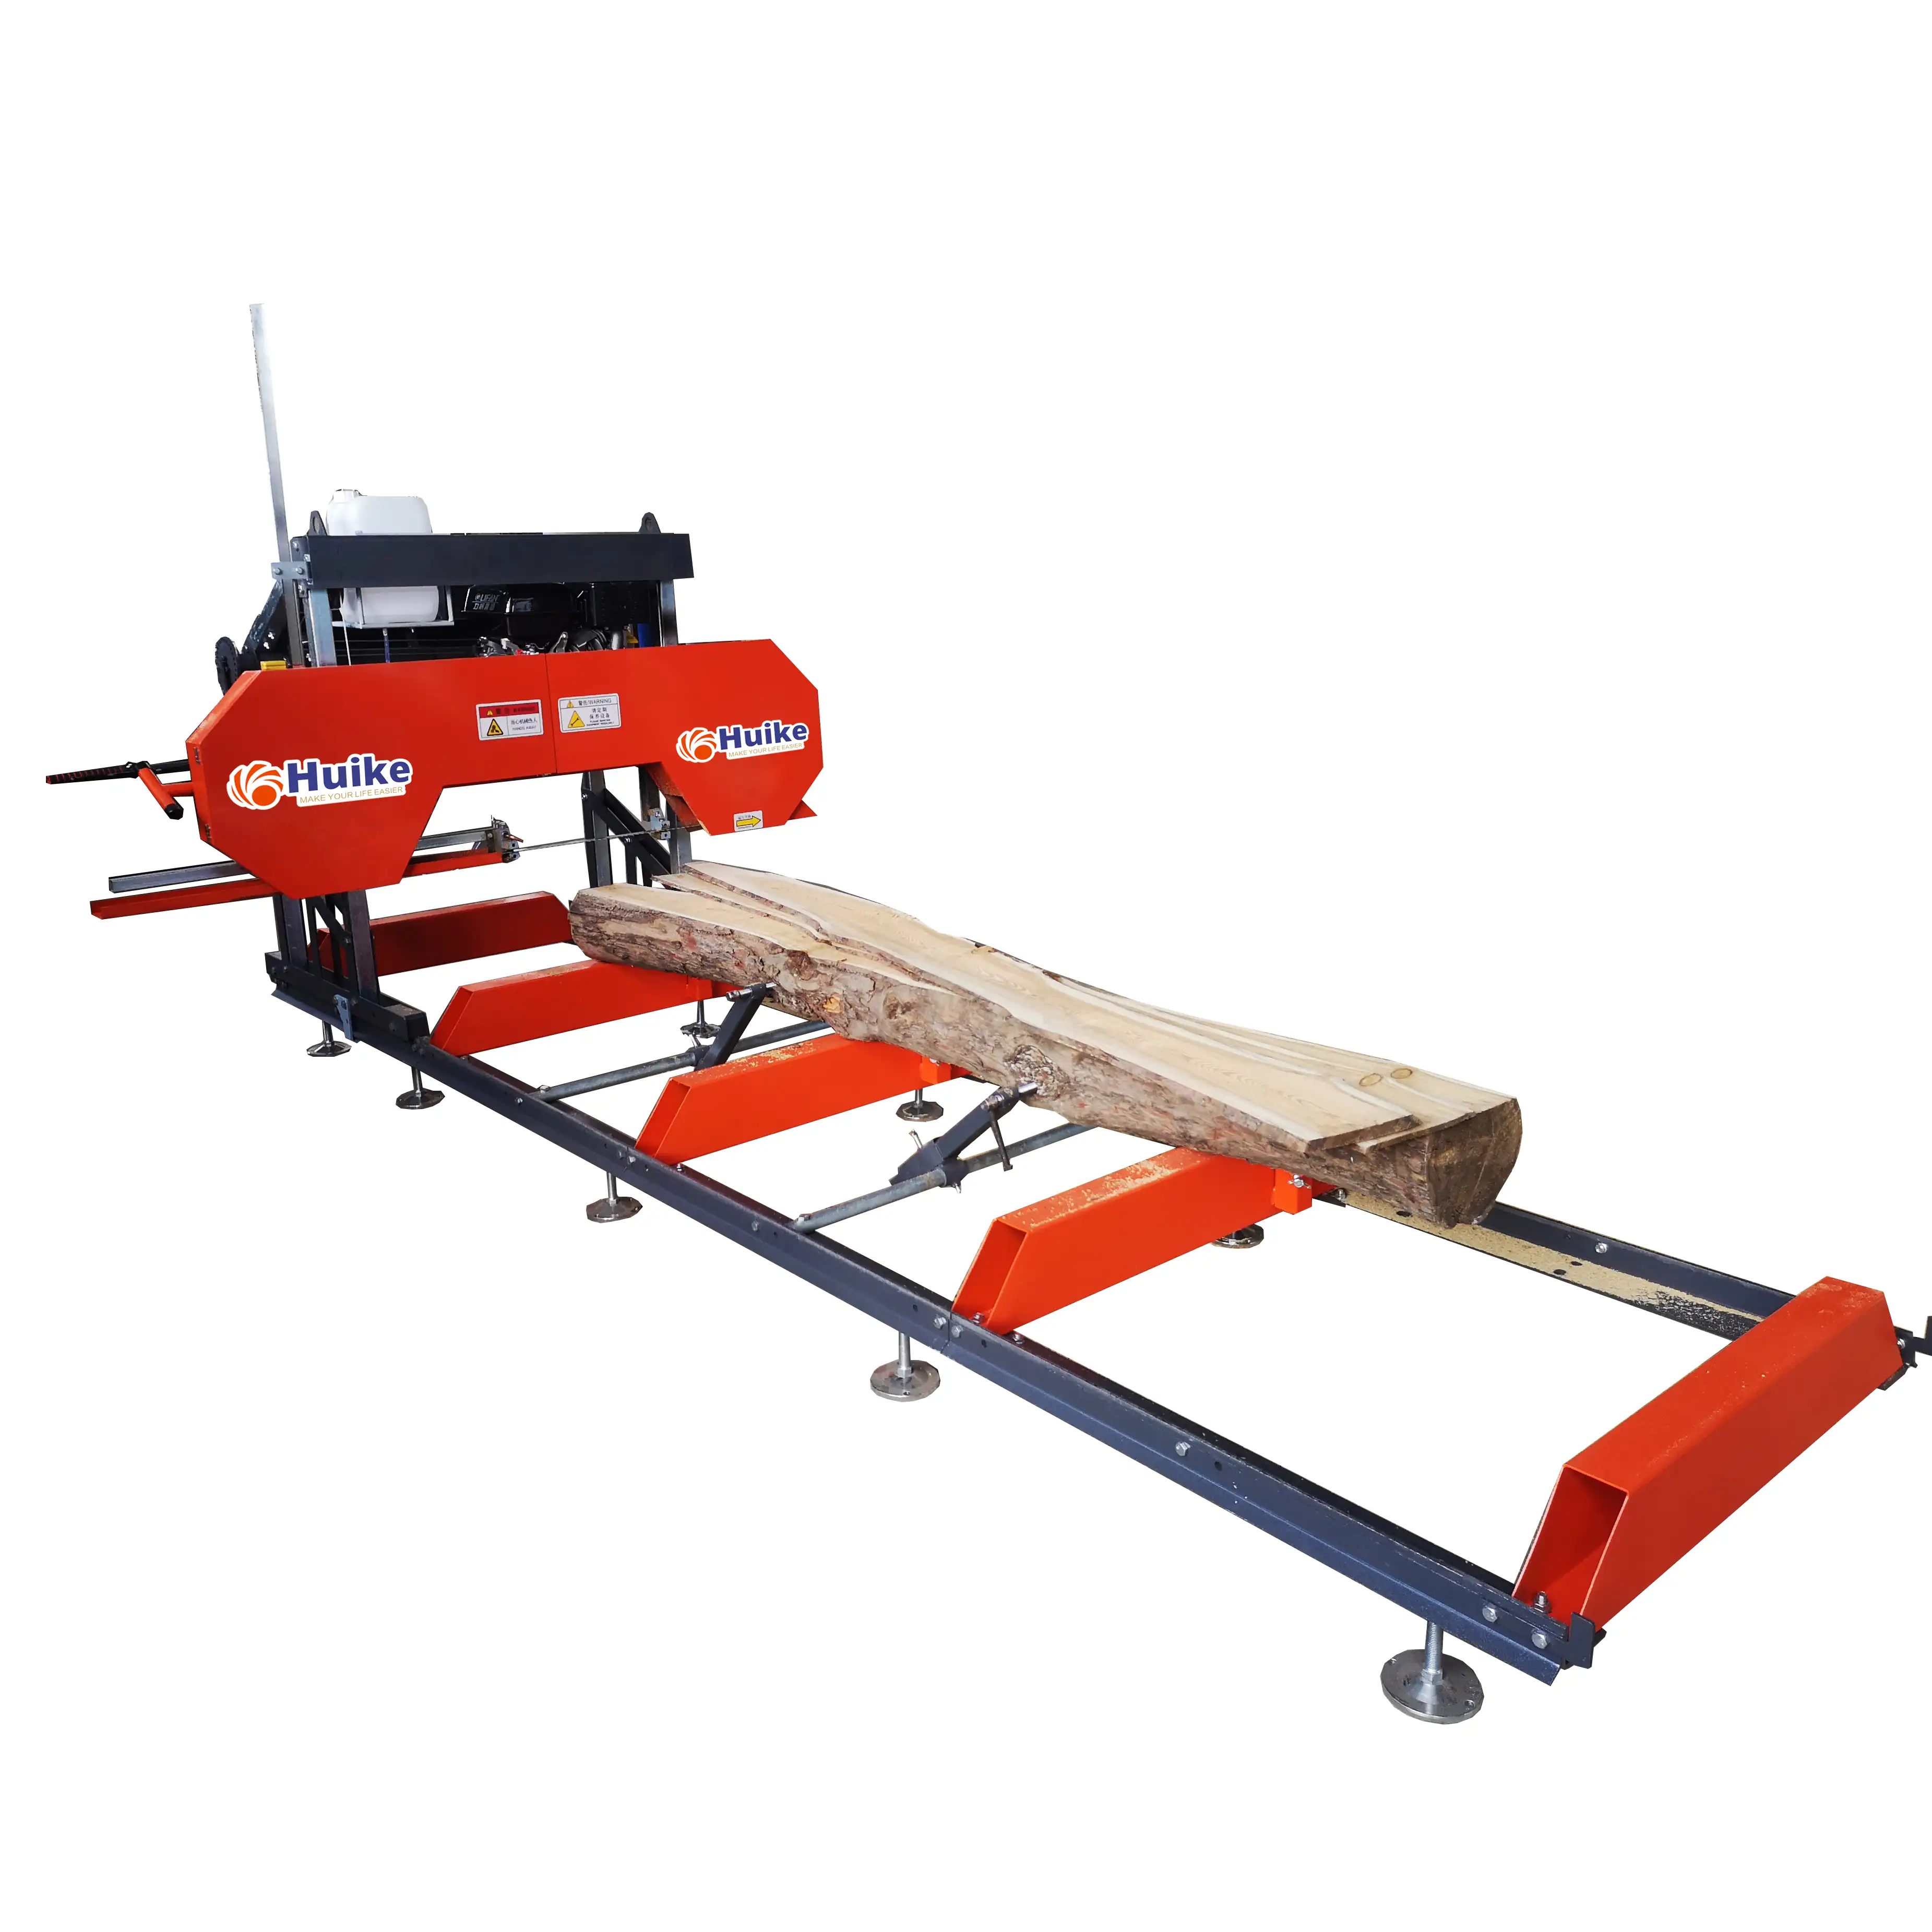 Hot Sale 31 inch Petrol diesel or electric portable horizontal mobile trailer log saw band bandsaw sawmill for wood cutting